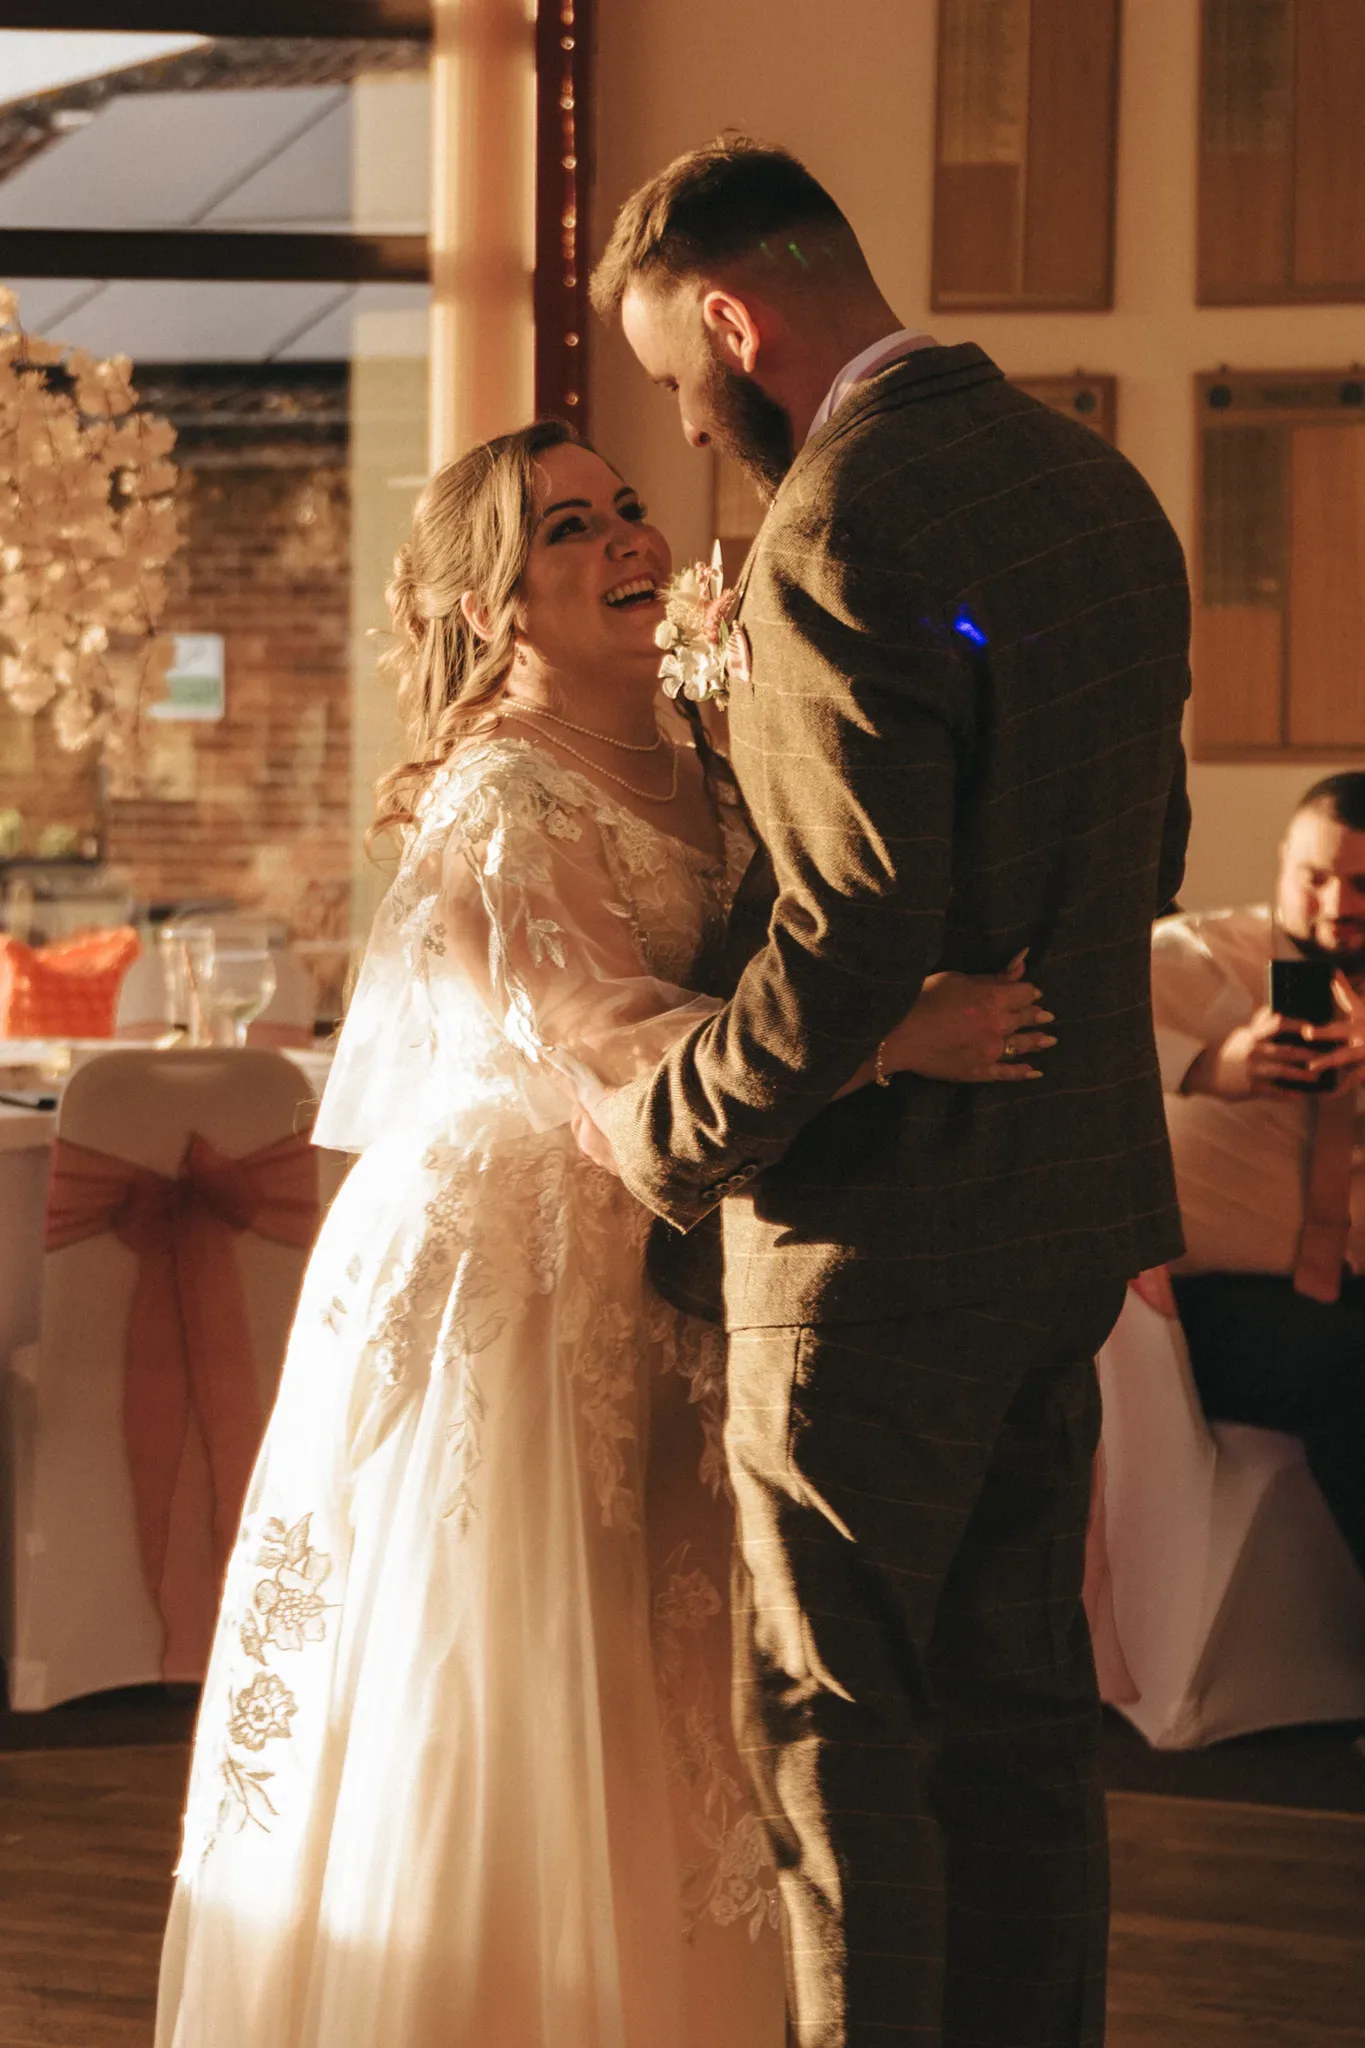 A bride and groom share a joyful dance under warm lighting at their wedding reception. the bride, in a lace-detailed dress with sheer sleeves, smiles up at the groom, who is dressed in a tailored tweed suit.